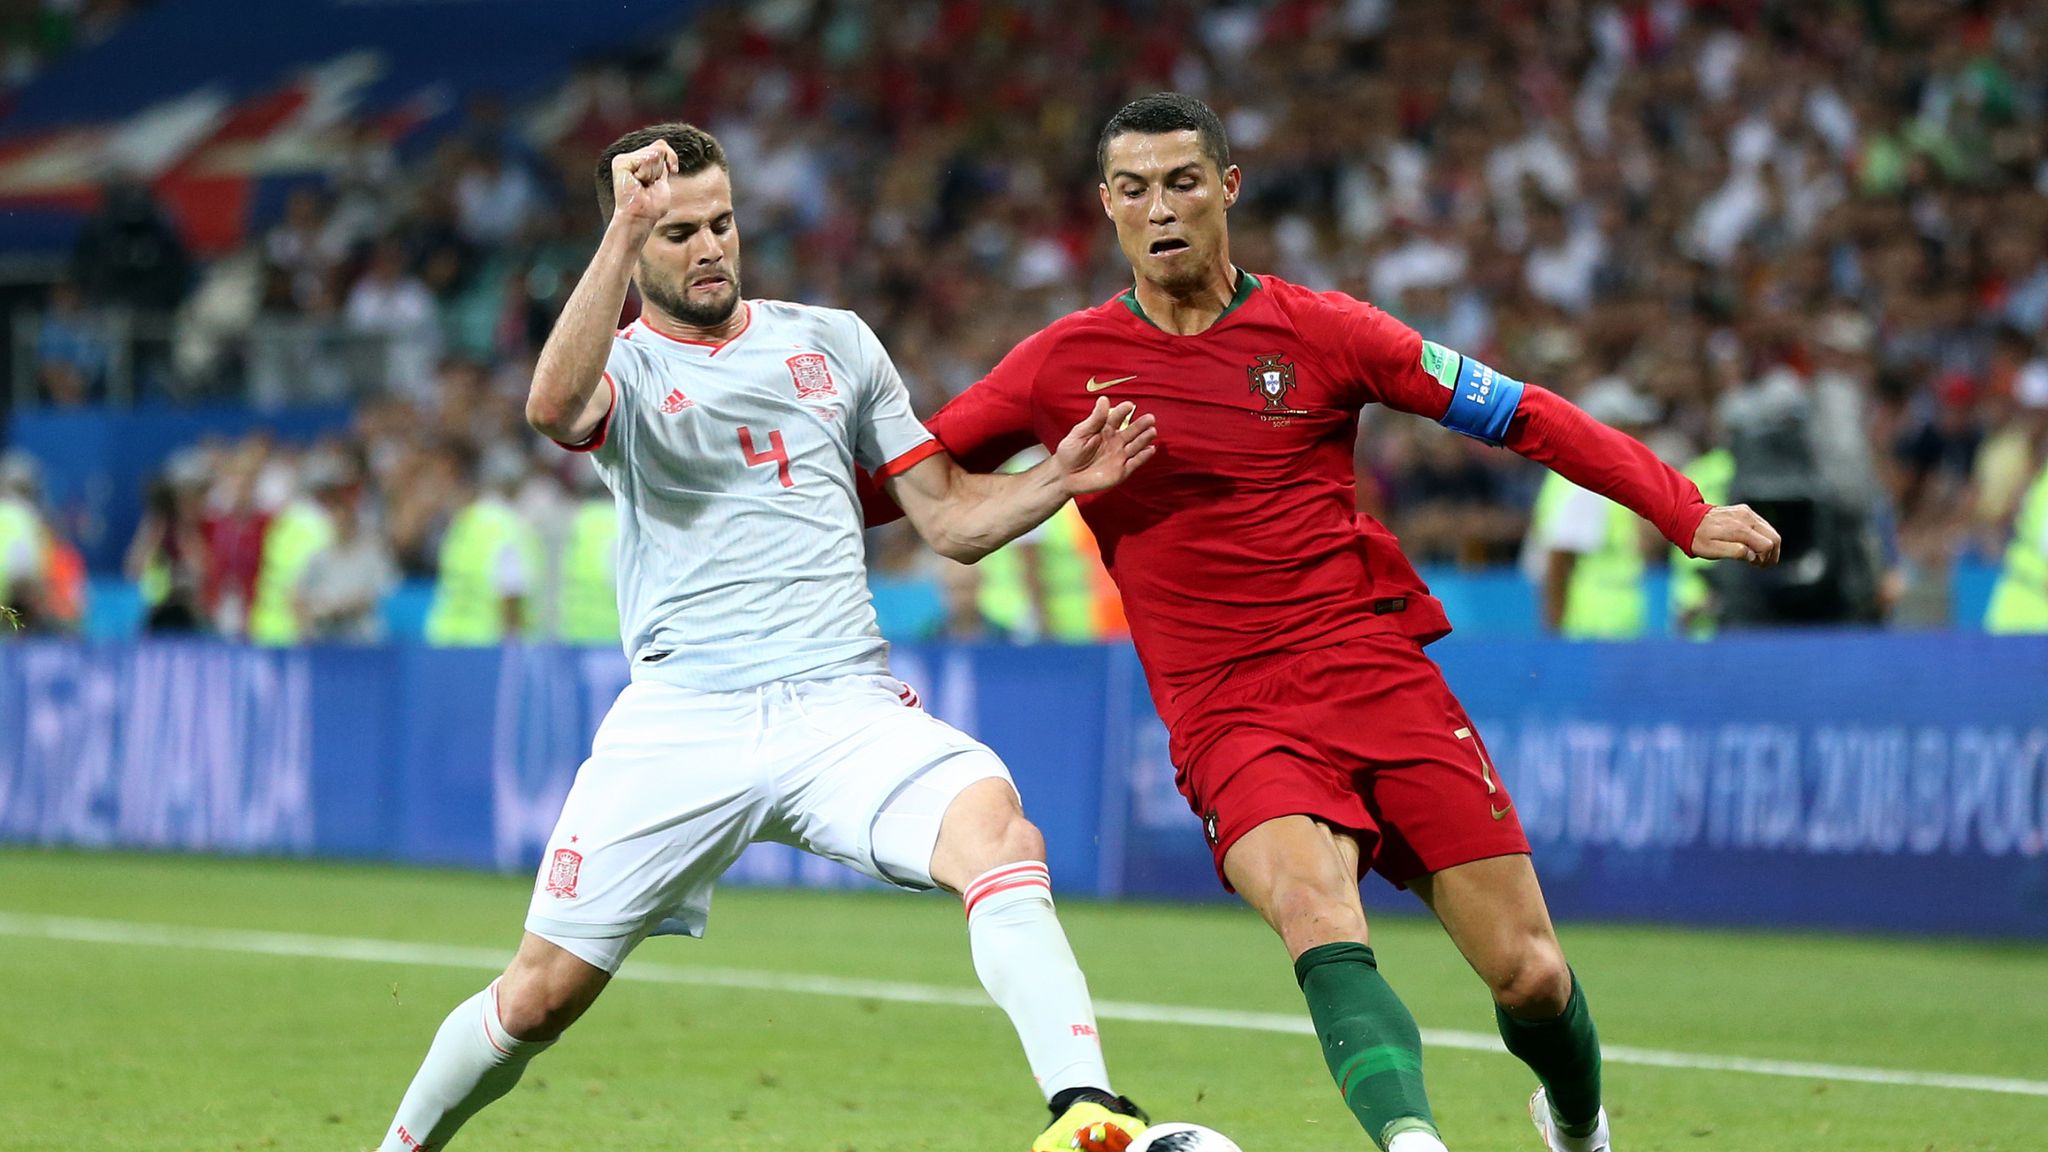 Cristiano Ronaldo hattrick against Spain sets World Cup alight as